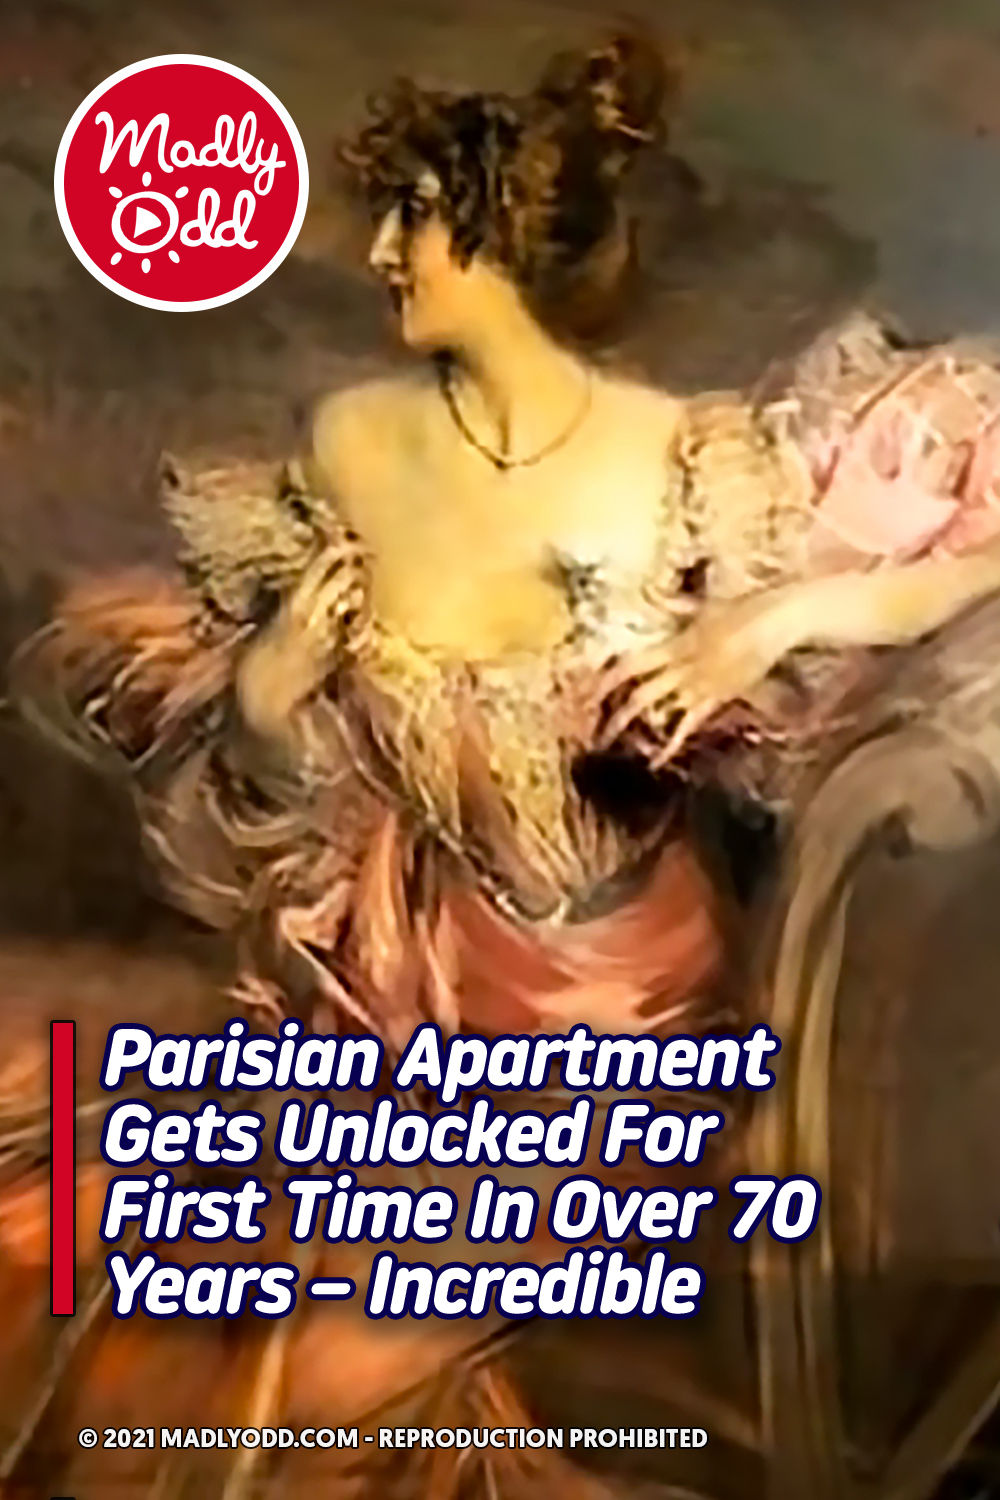 Parisian Apartment Gets Unlocked For First Time In Over 70 Years – Incredible